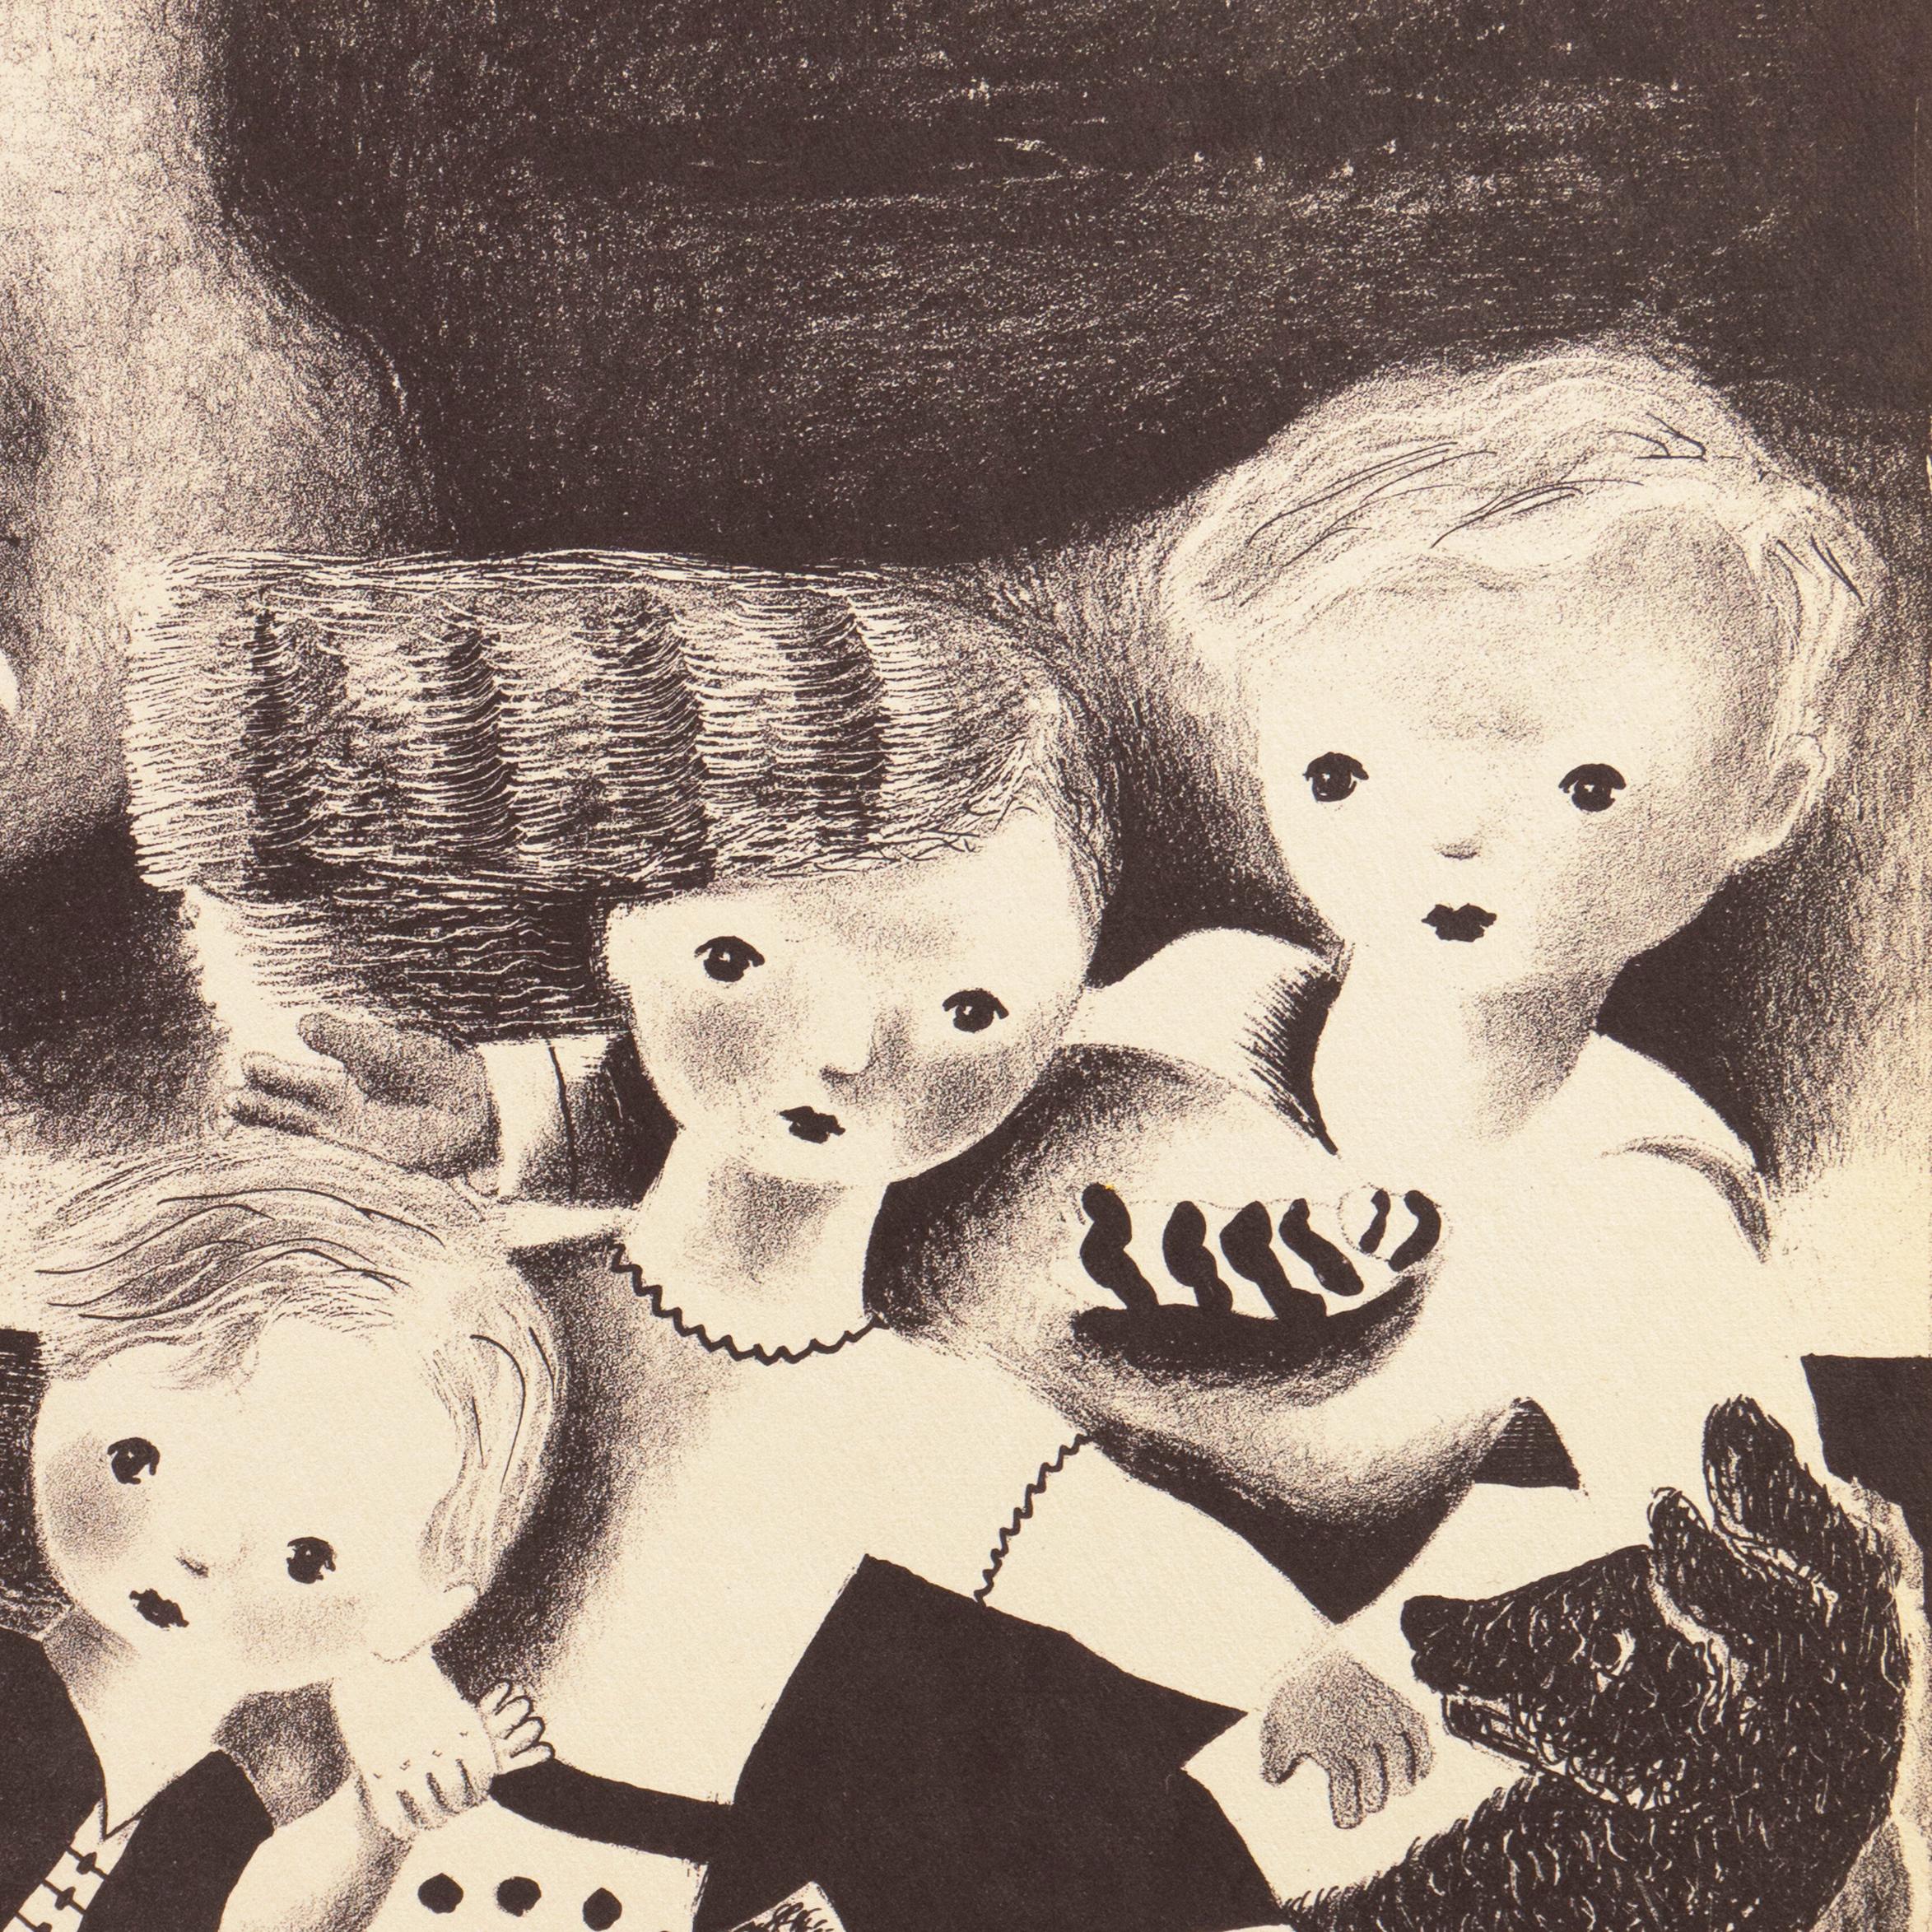 A stone lithograph titled 'Bert, Bob and Betsy' by Nura Woodson Ulreich (American, 1899-1950), created in 1943 and with certification of authenticity stamped verso. Accompanied by the artist's poem.

This notable woman painter, illustrator,